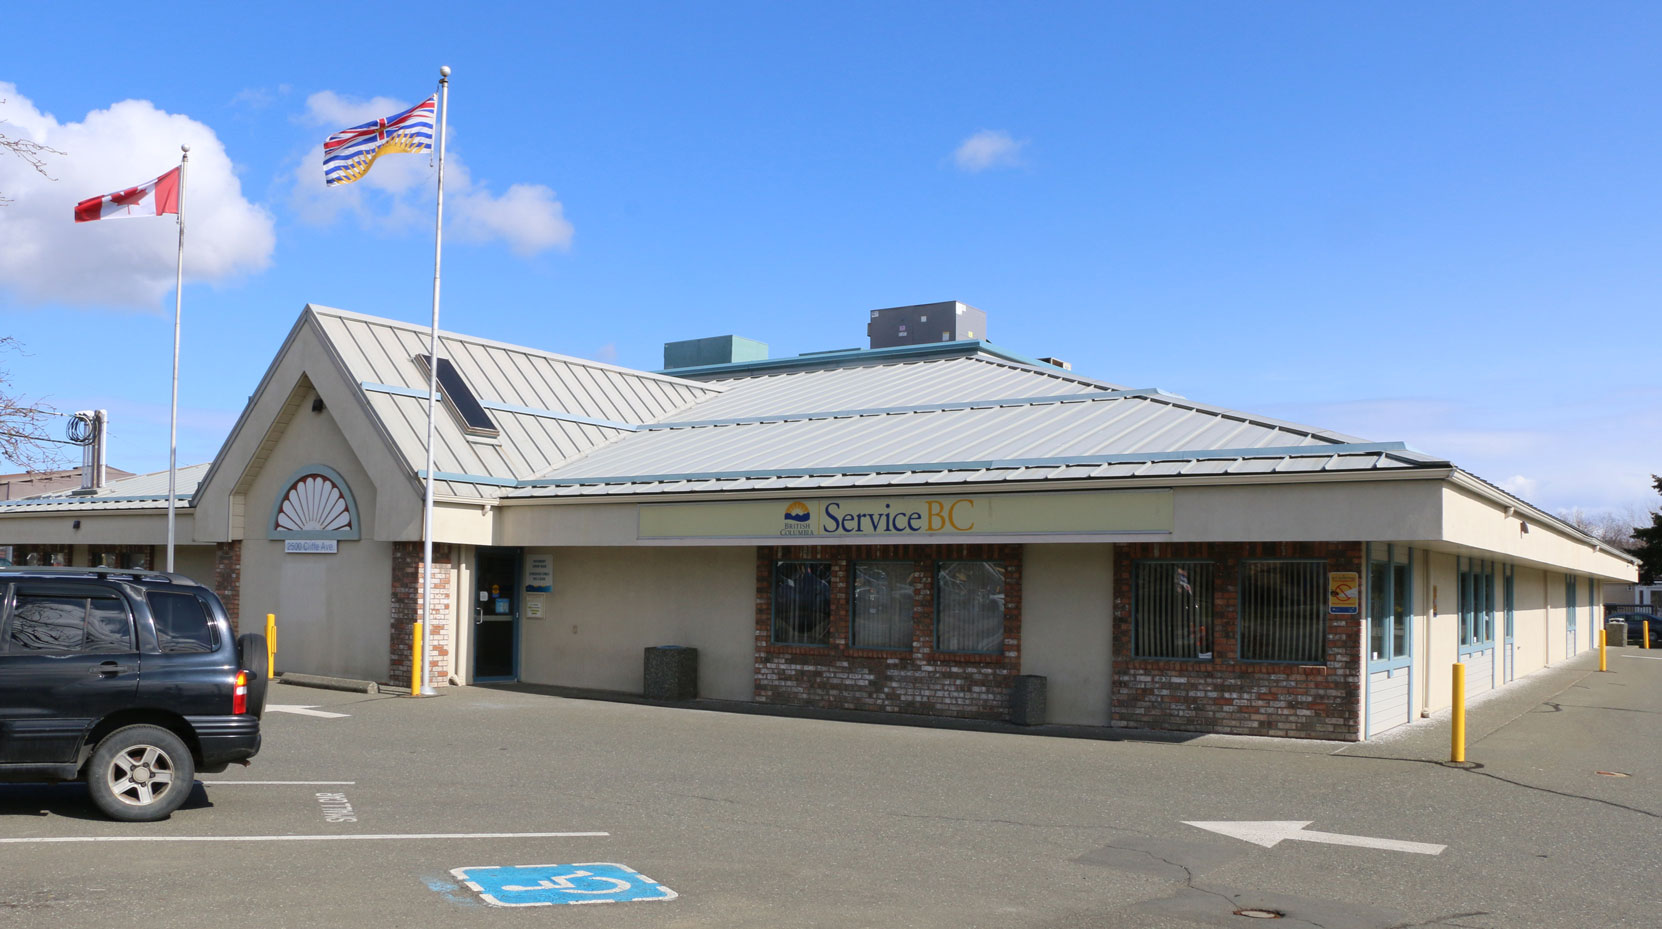 ServiceBC, 2500 Cliffe Avenue, Courtenay, B.C. handles all aspects of Driver Licensing, including Road Tests, in the Courtenay/Comox area.